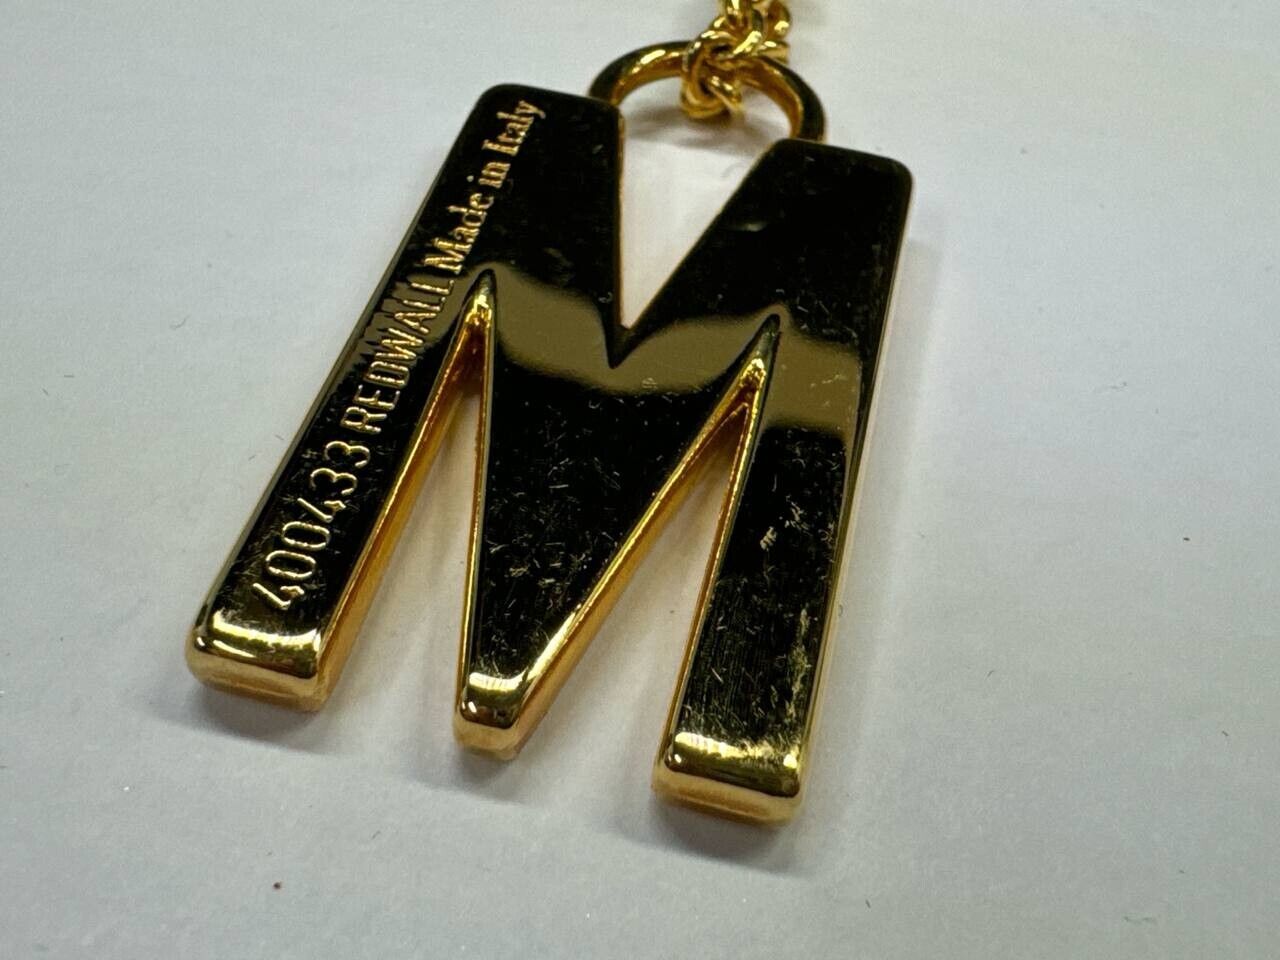 Vintage Moschino Chunky Gold Key Chain - image 8